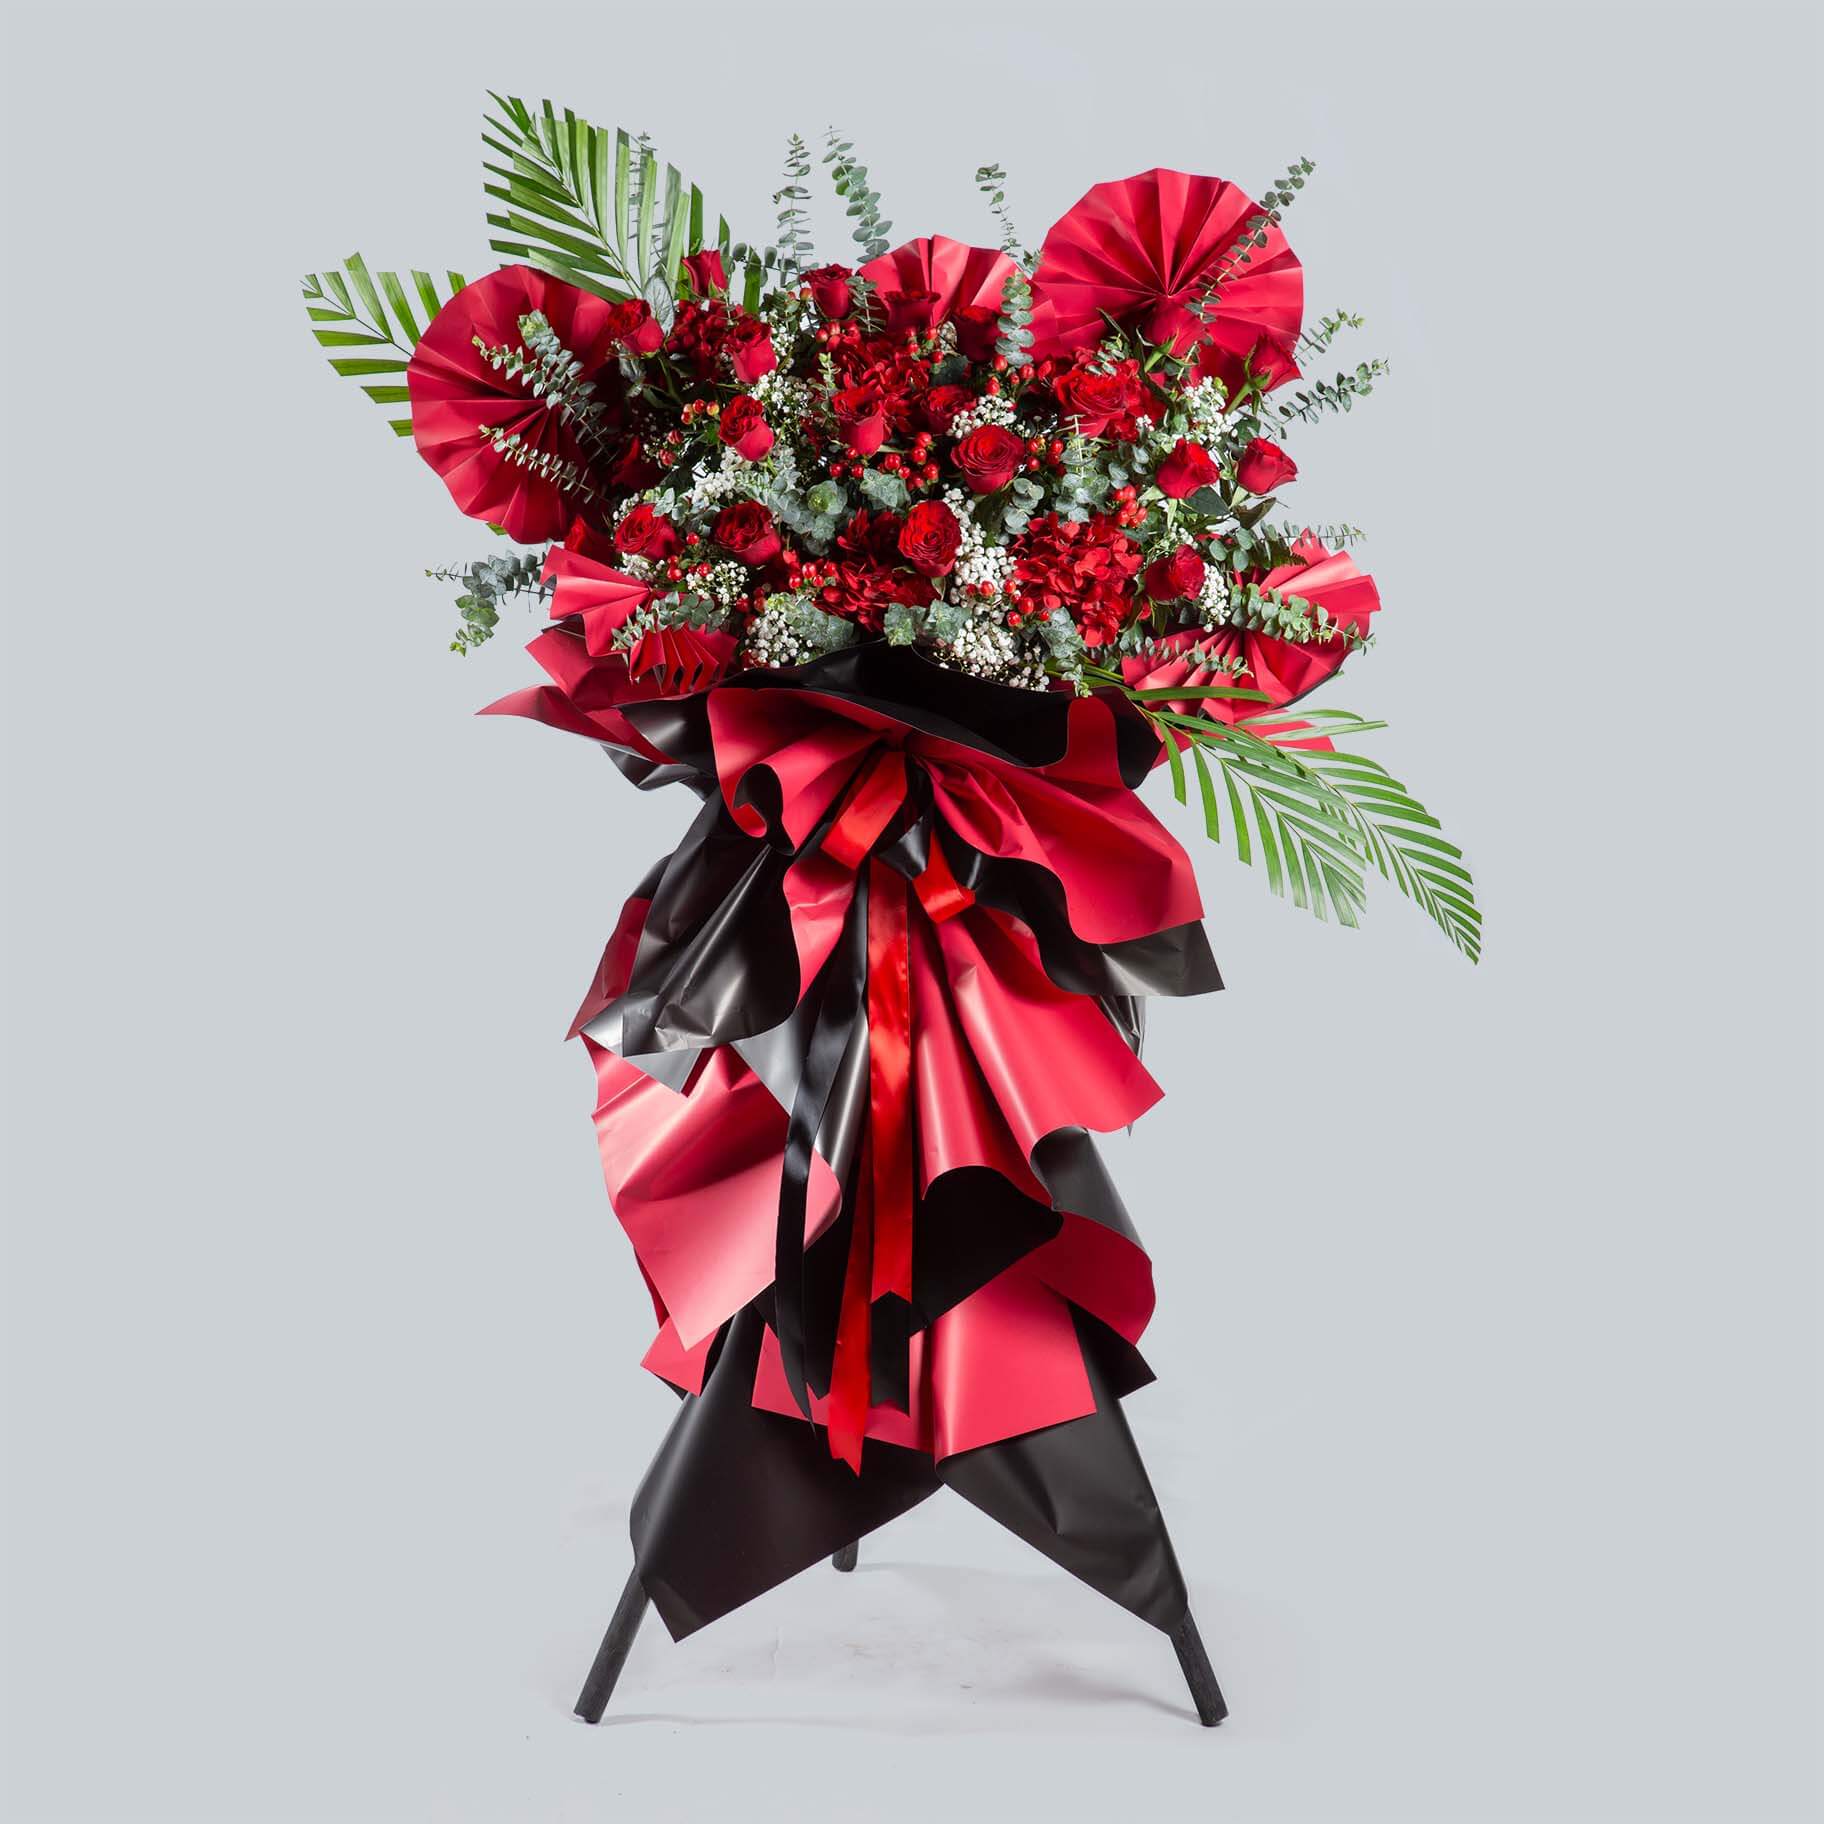 Occasions where you should get a flower stand